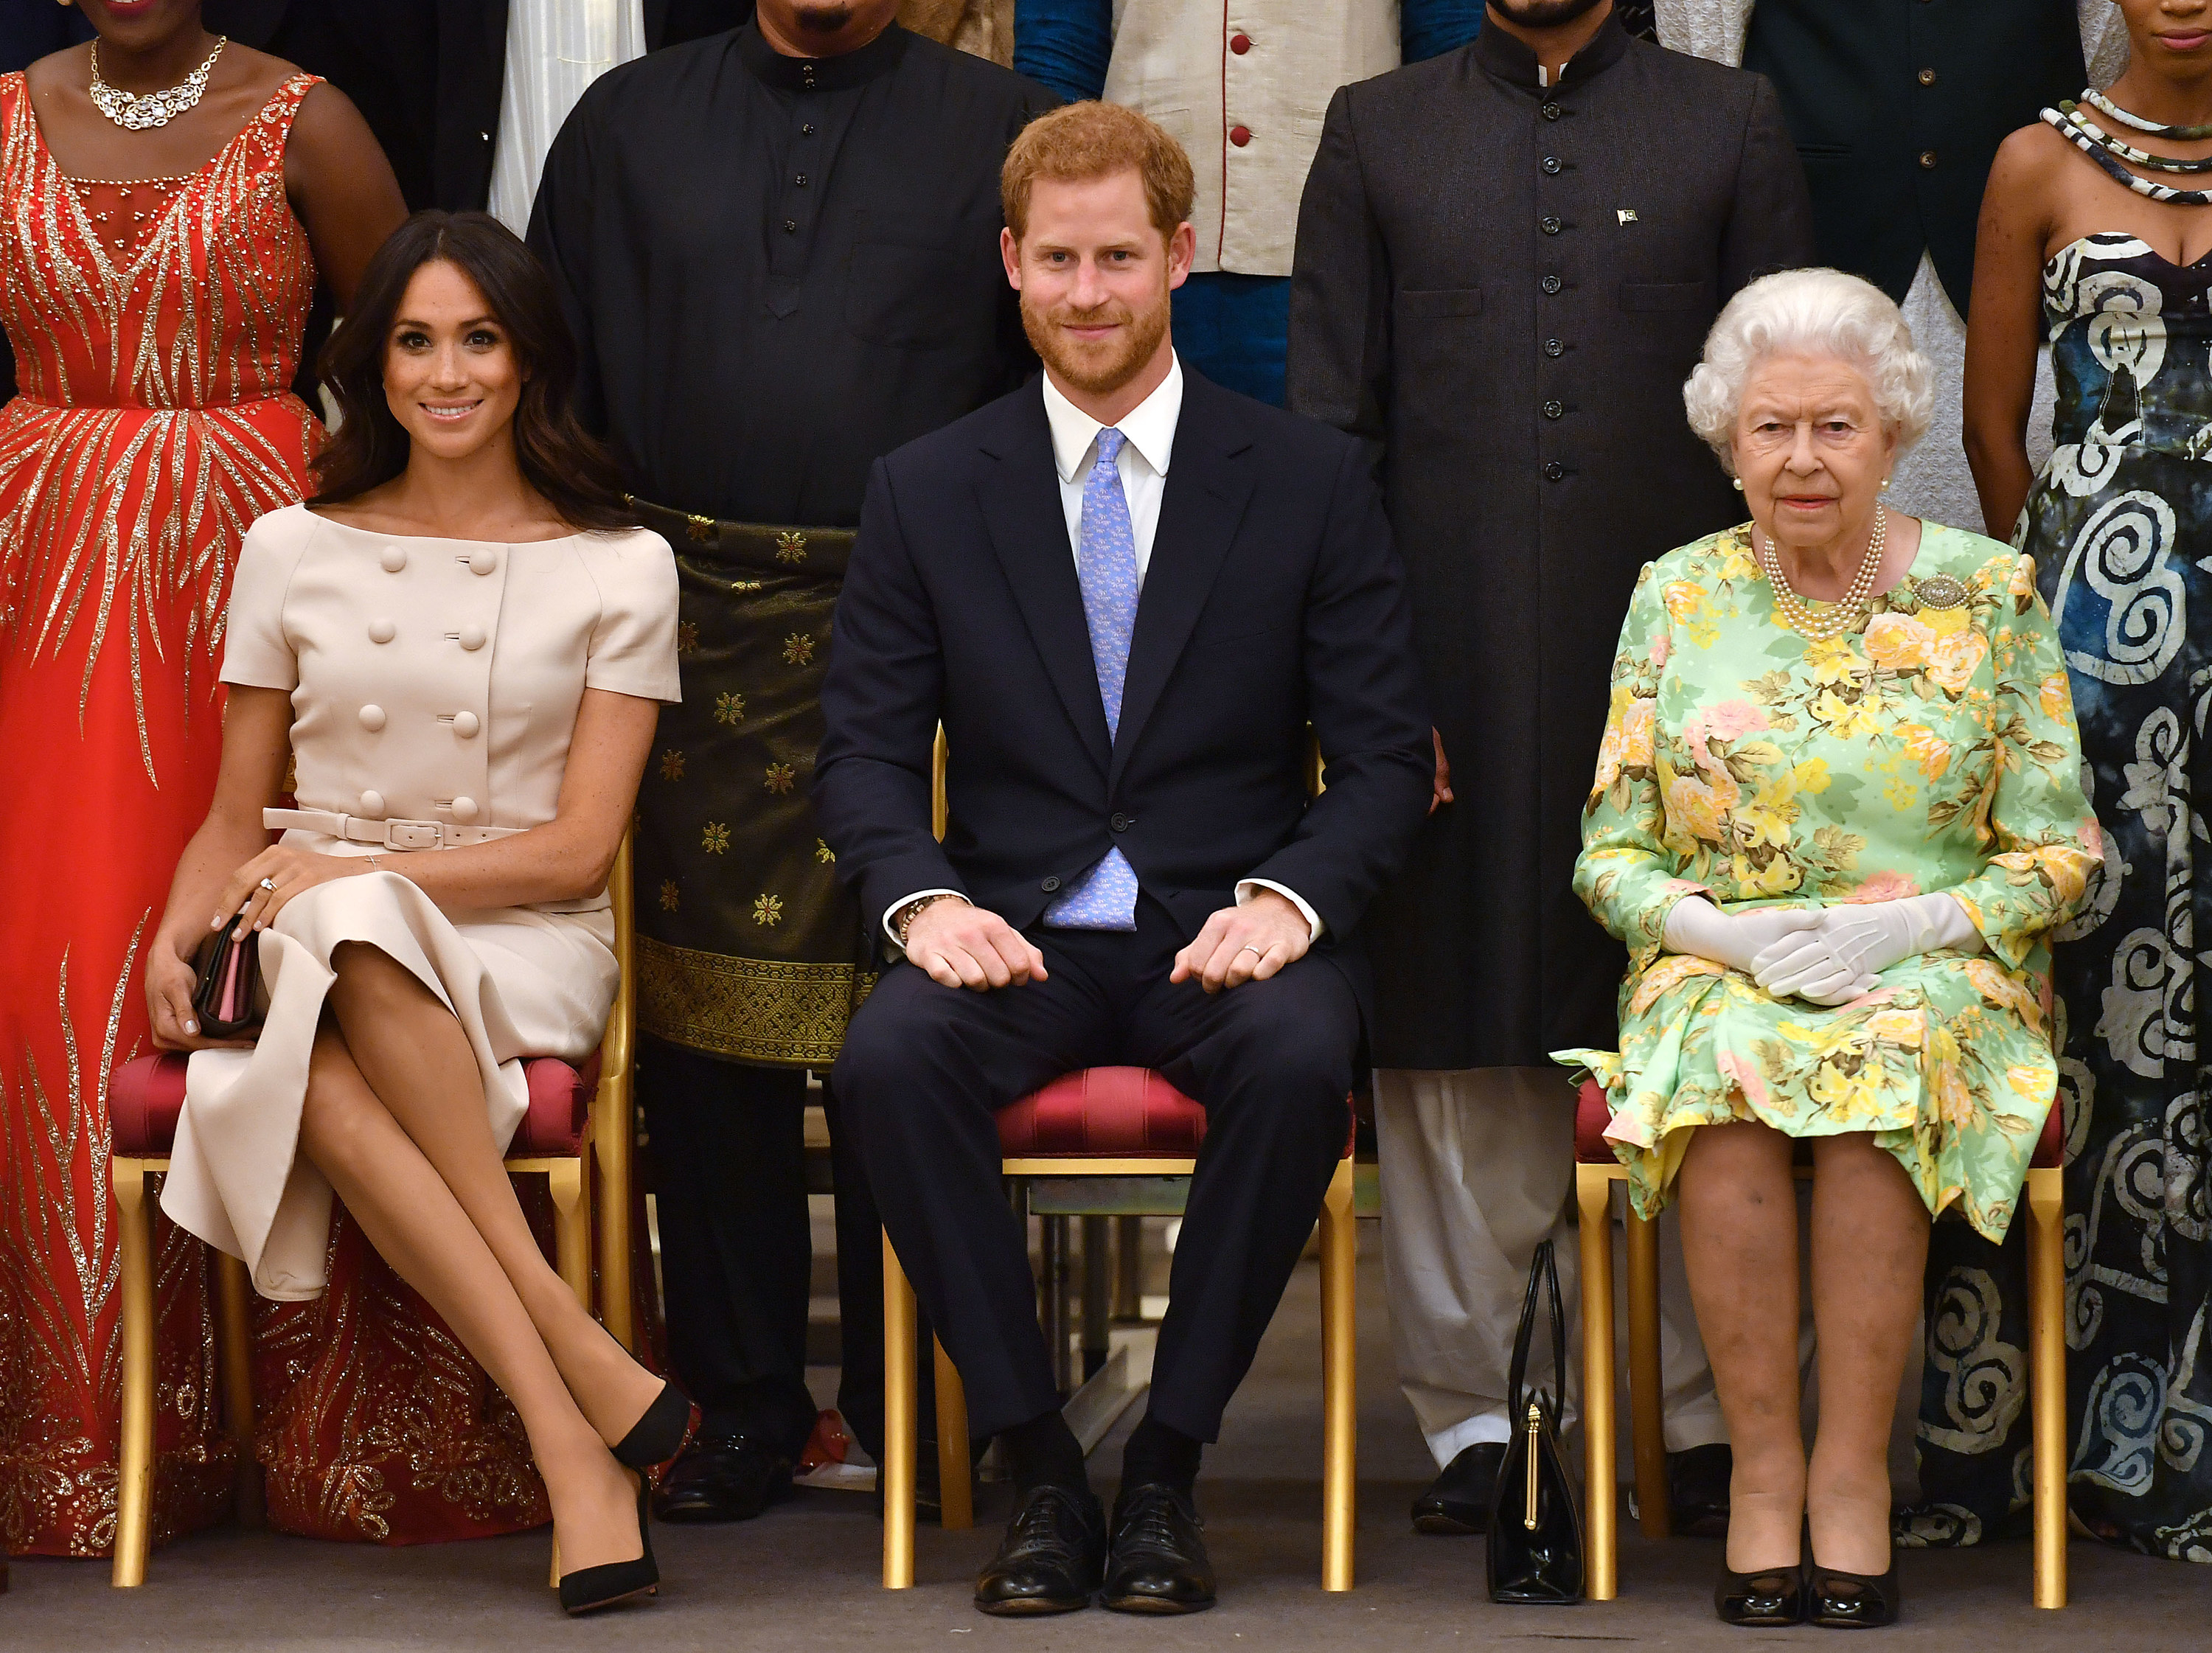 Meghan, Harry and the queen sit in chairs at an event